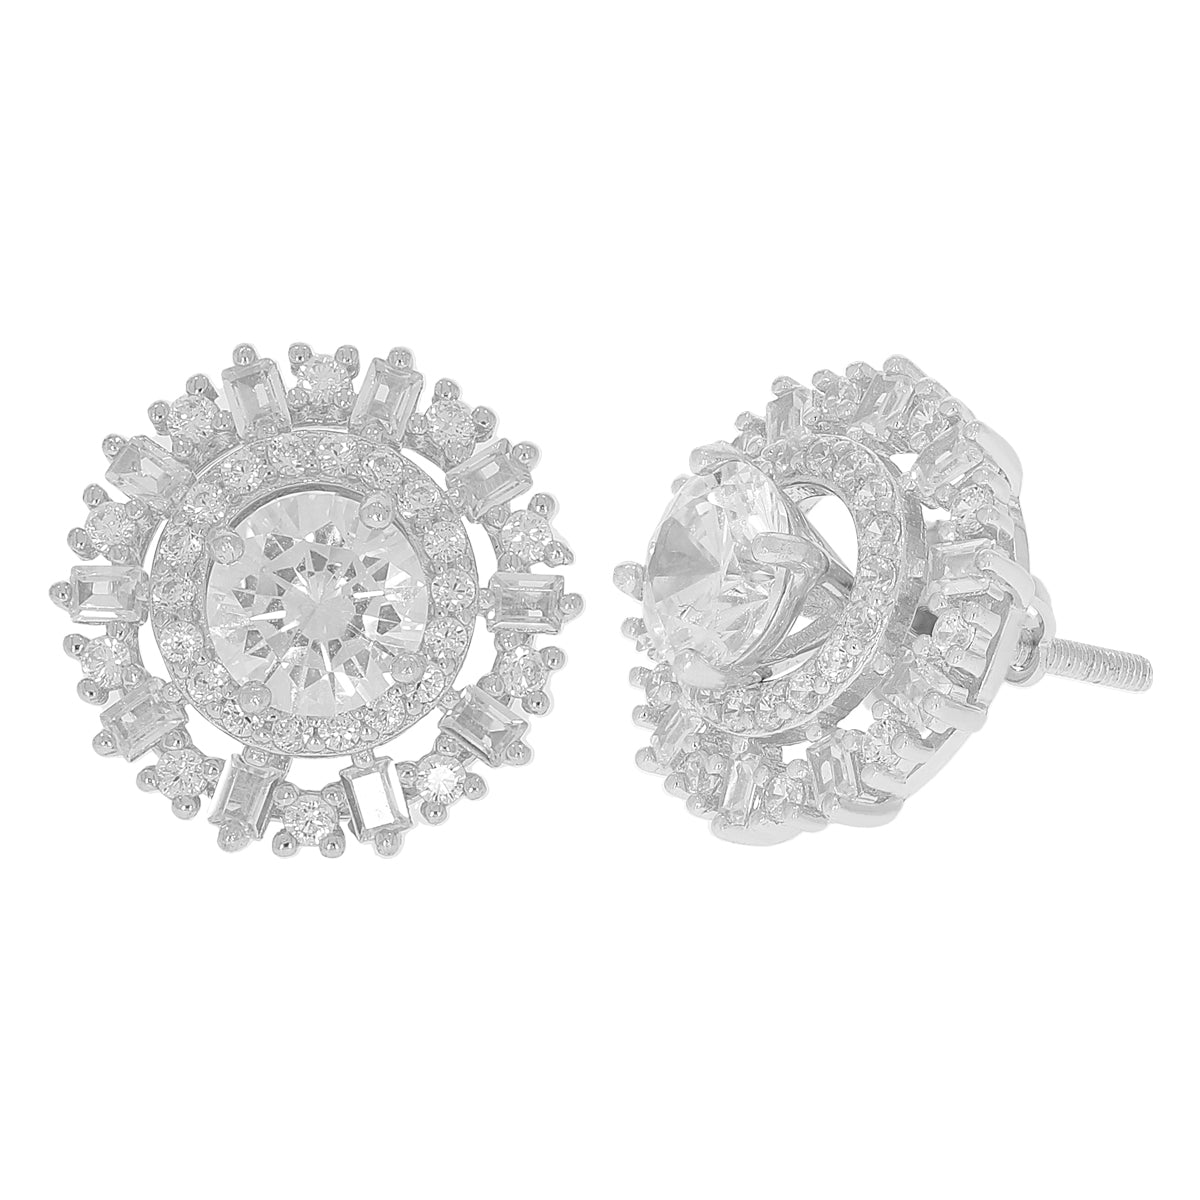 Magnificent Floral Convertible Silver Diamond Earrings